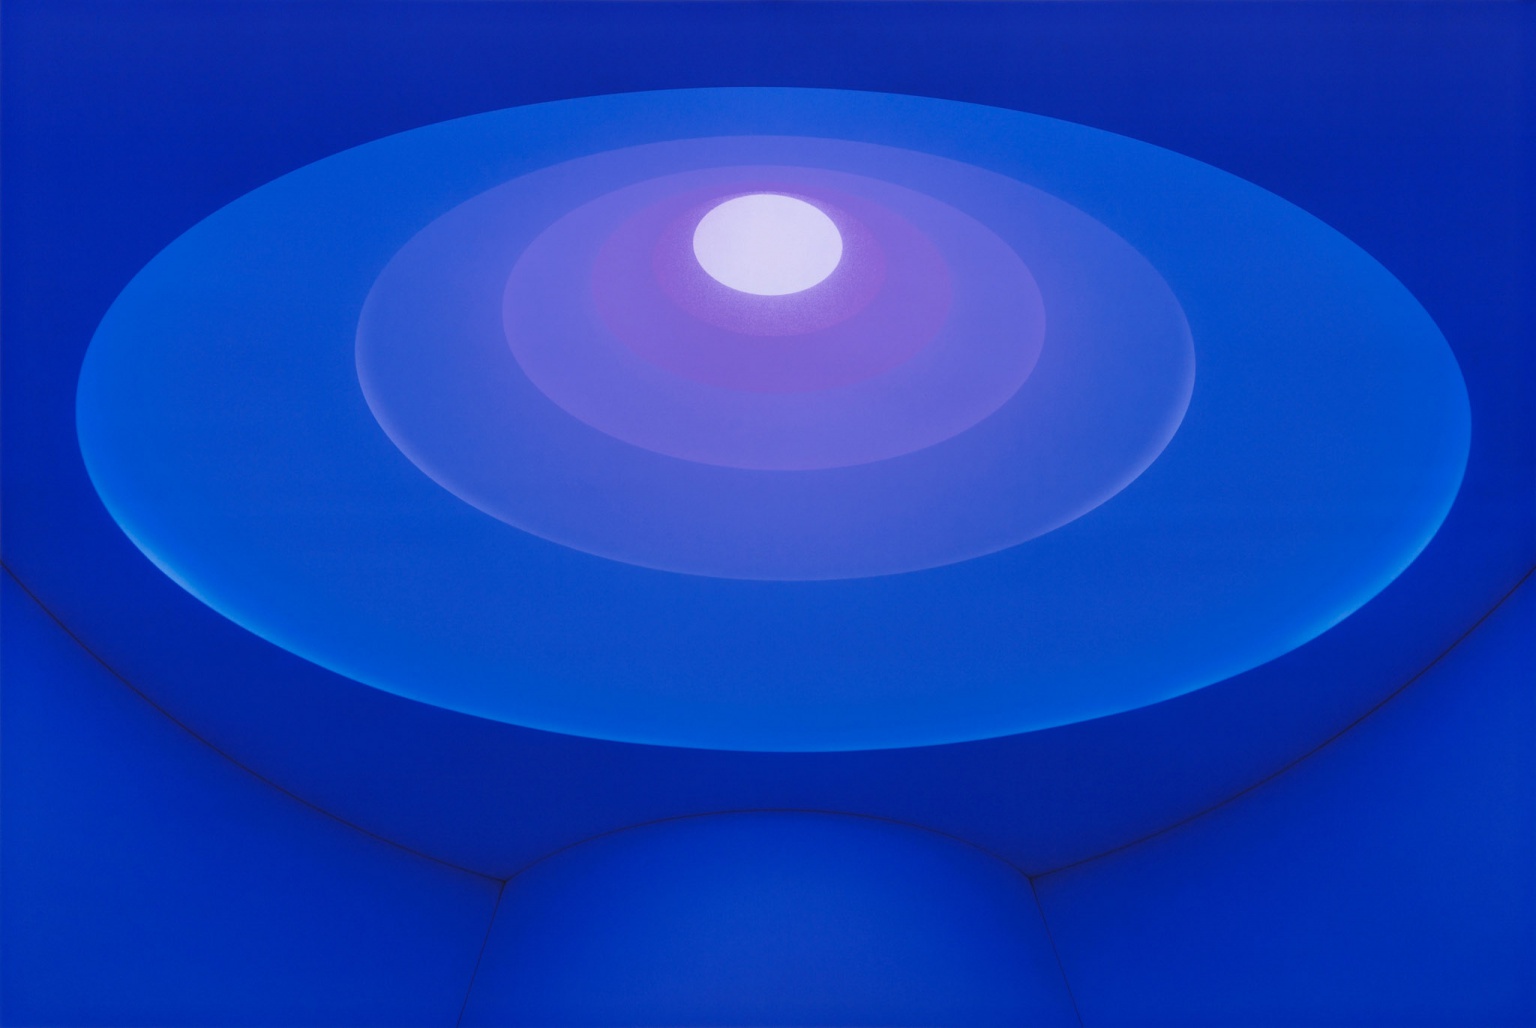 fine art print image by James Turrell, Eten Reign, 2015, Archival pigment print, 44 x 65 inches, Edition of 30